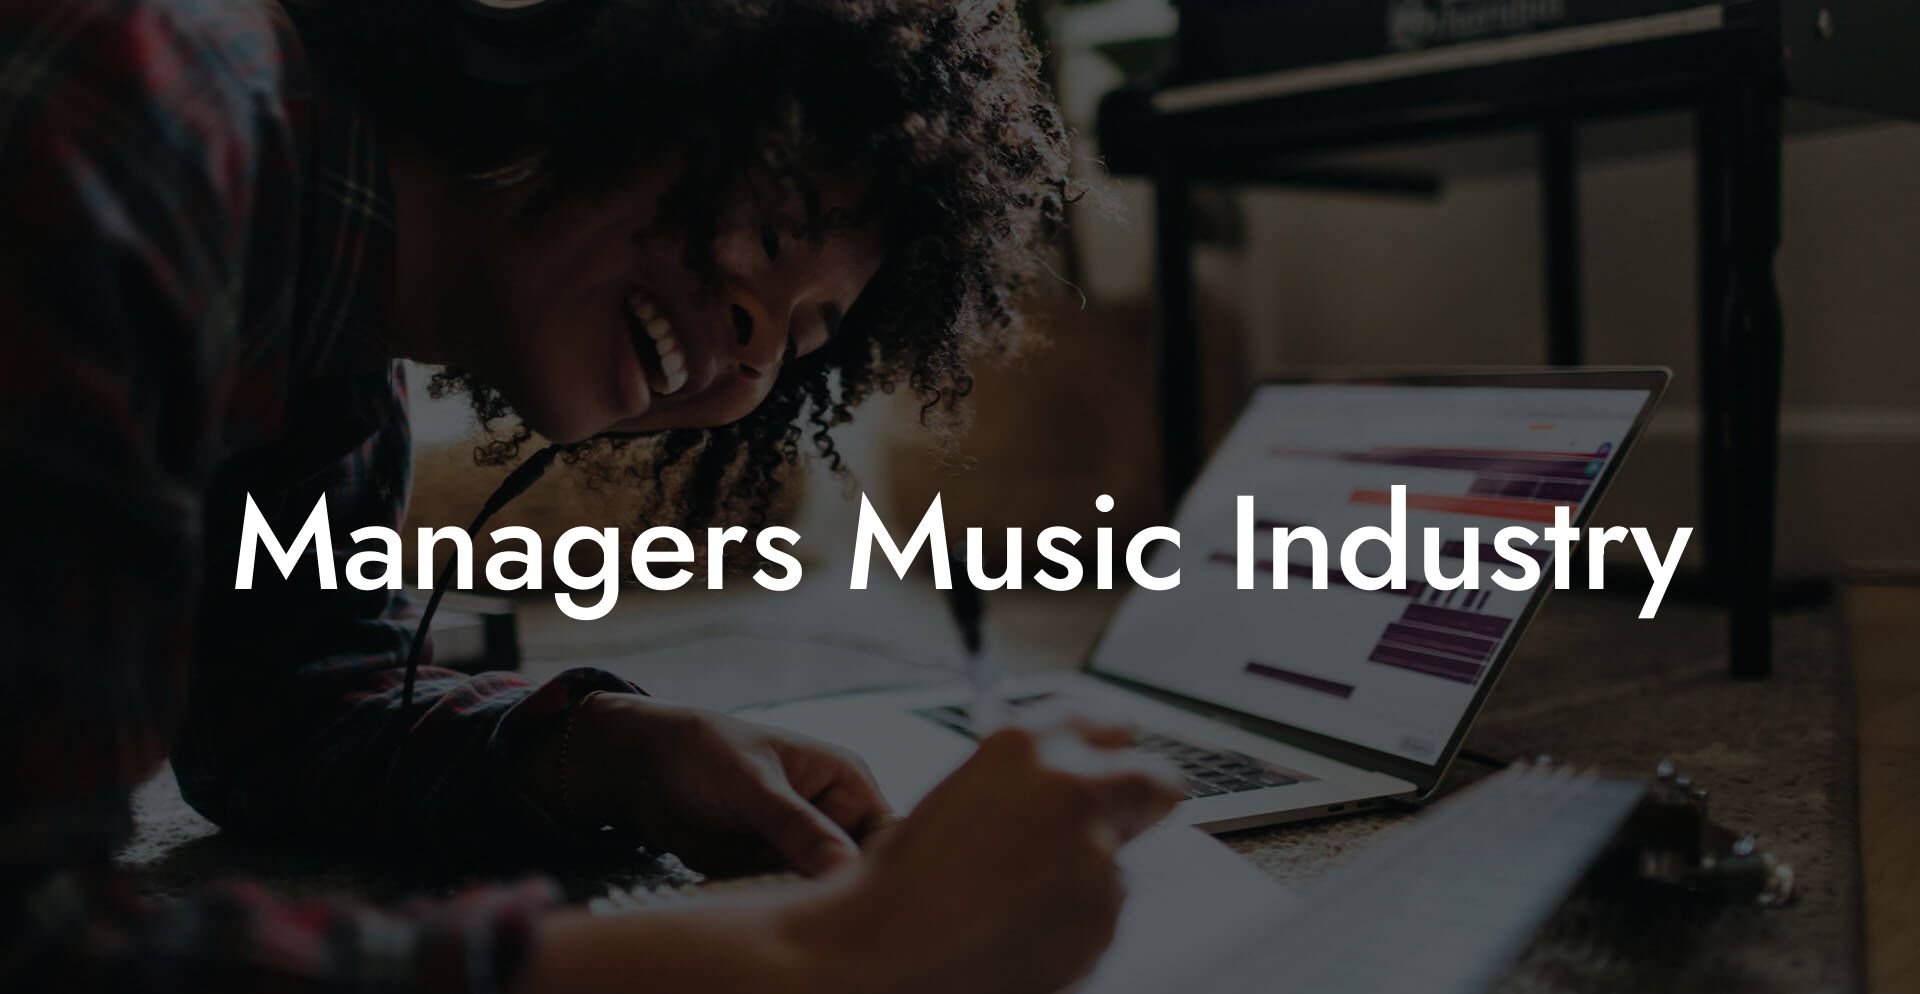 Managers Music Industry